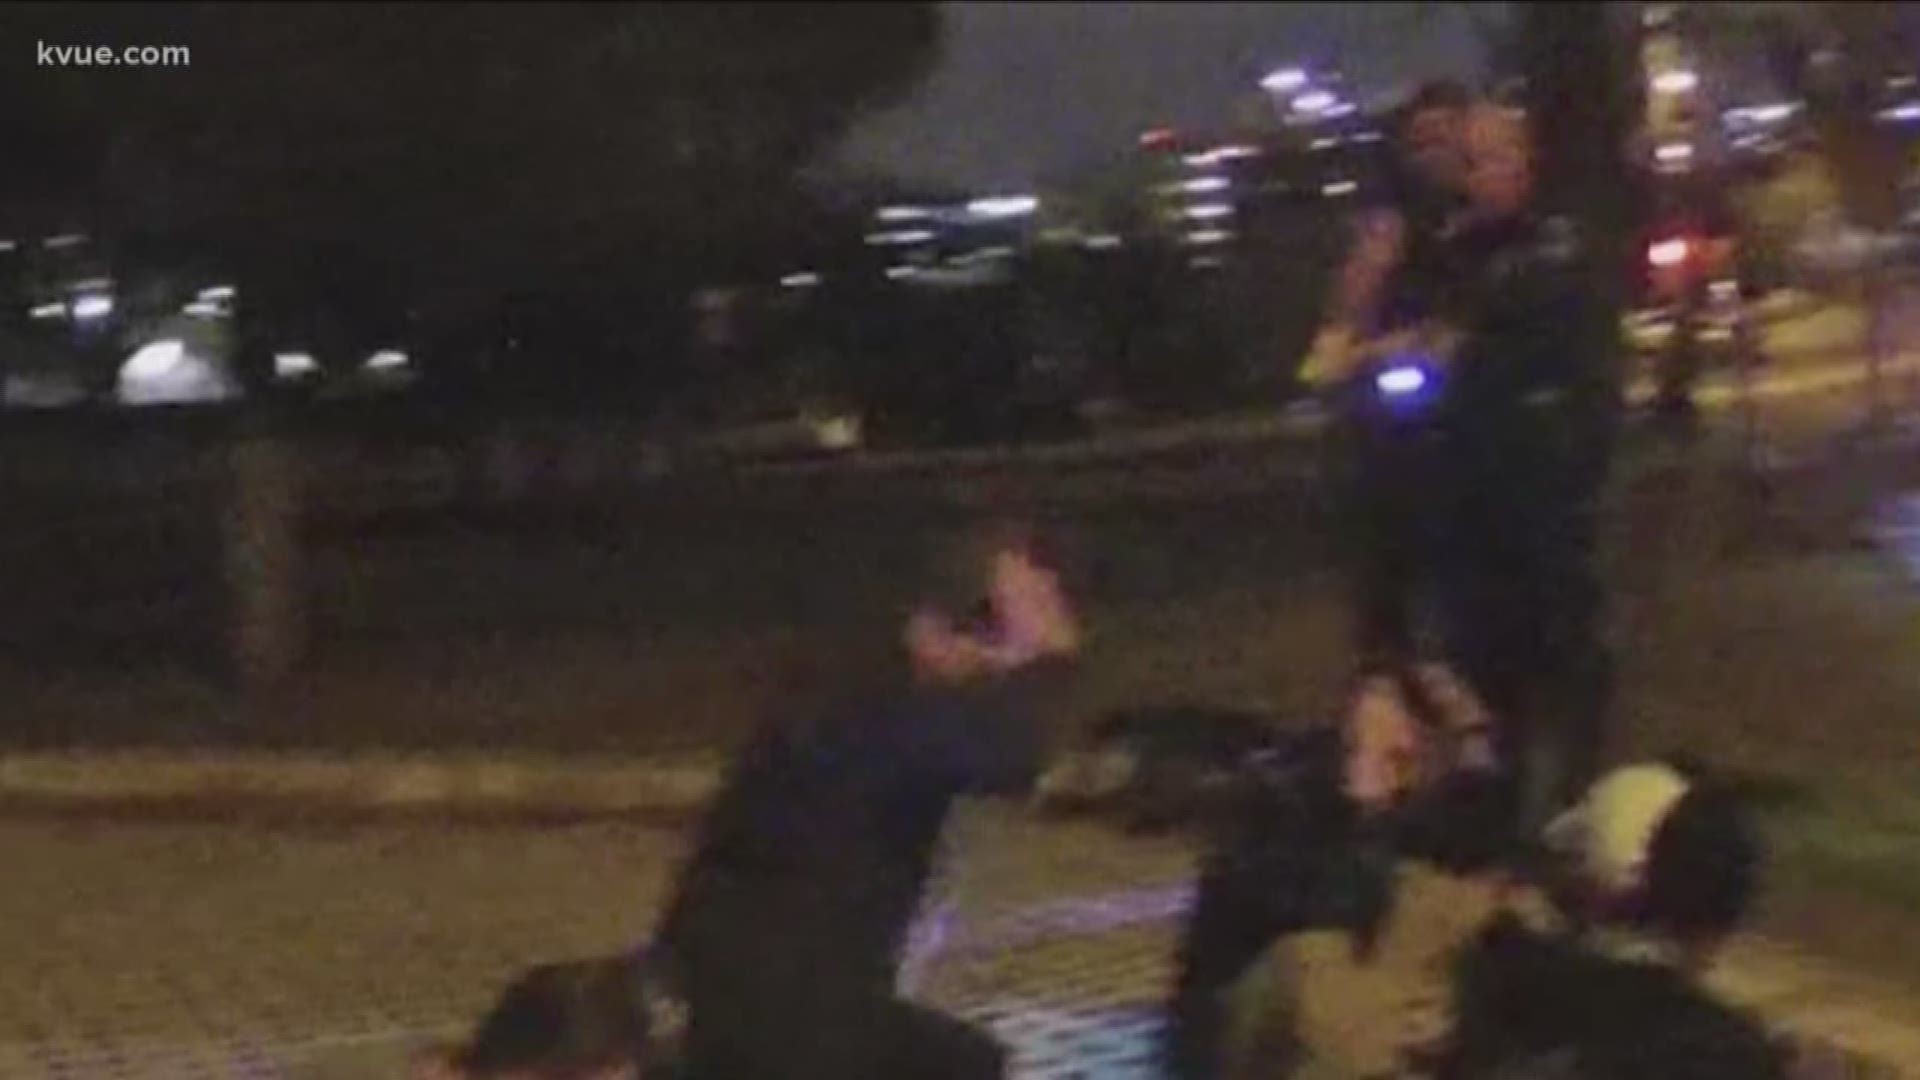 The video shows a man on his knees with his hands in the air as an Austin police officer Tased him.